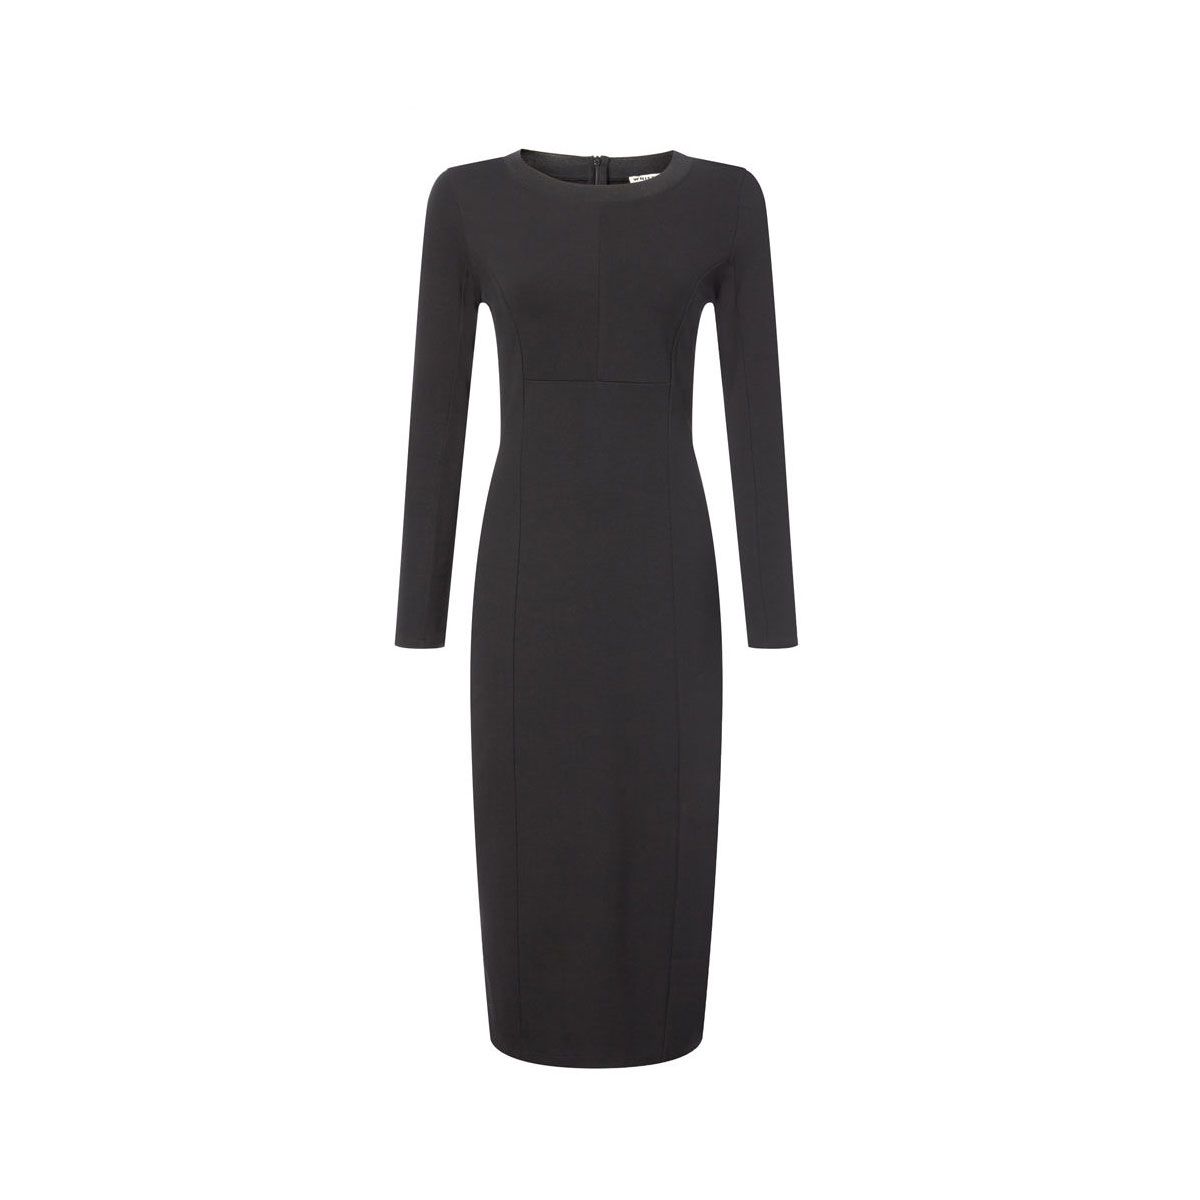 The Conservative Office - LBD - 15 Work Dresses For Any Office - The Cut